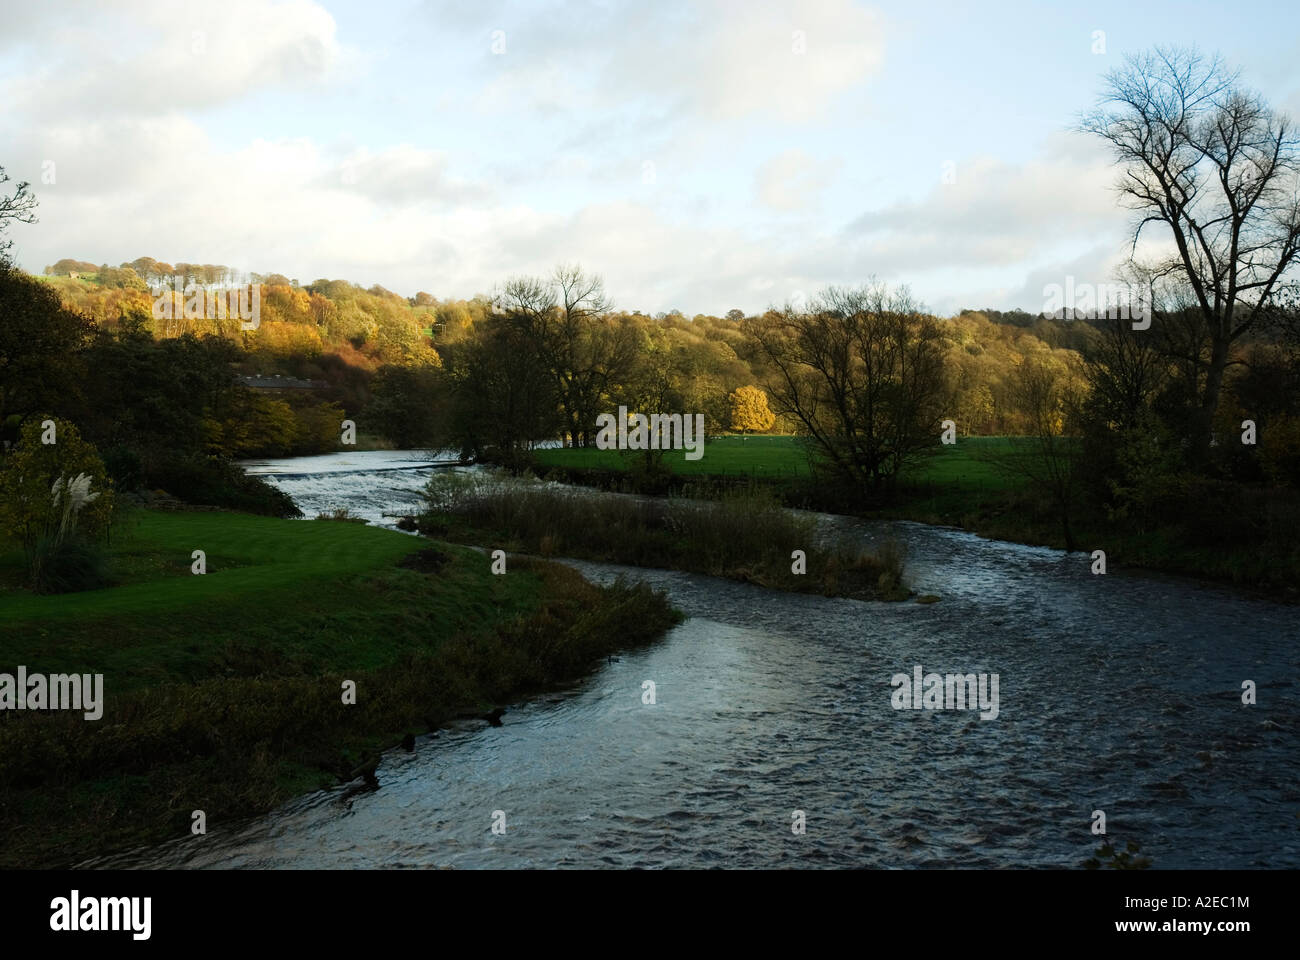 The River Calder at Whalley swollen by heavy rains. Stock Photo